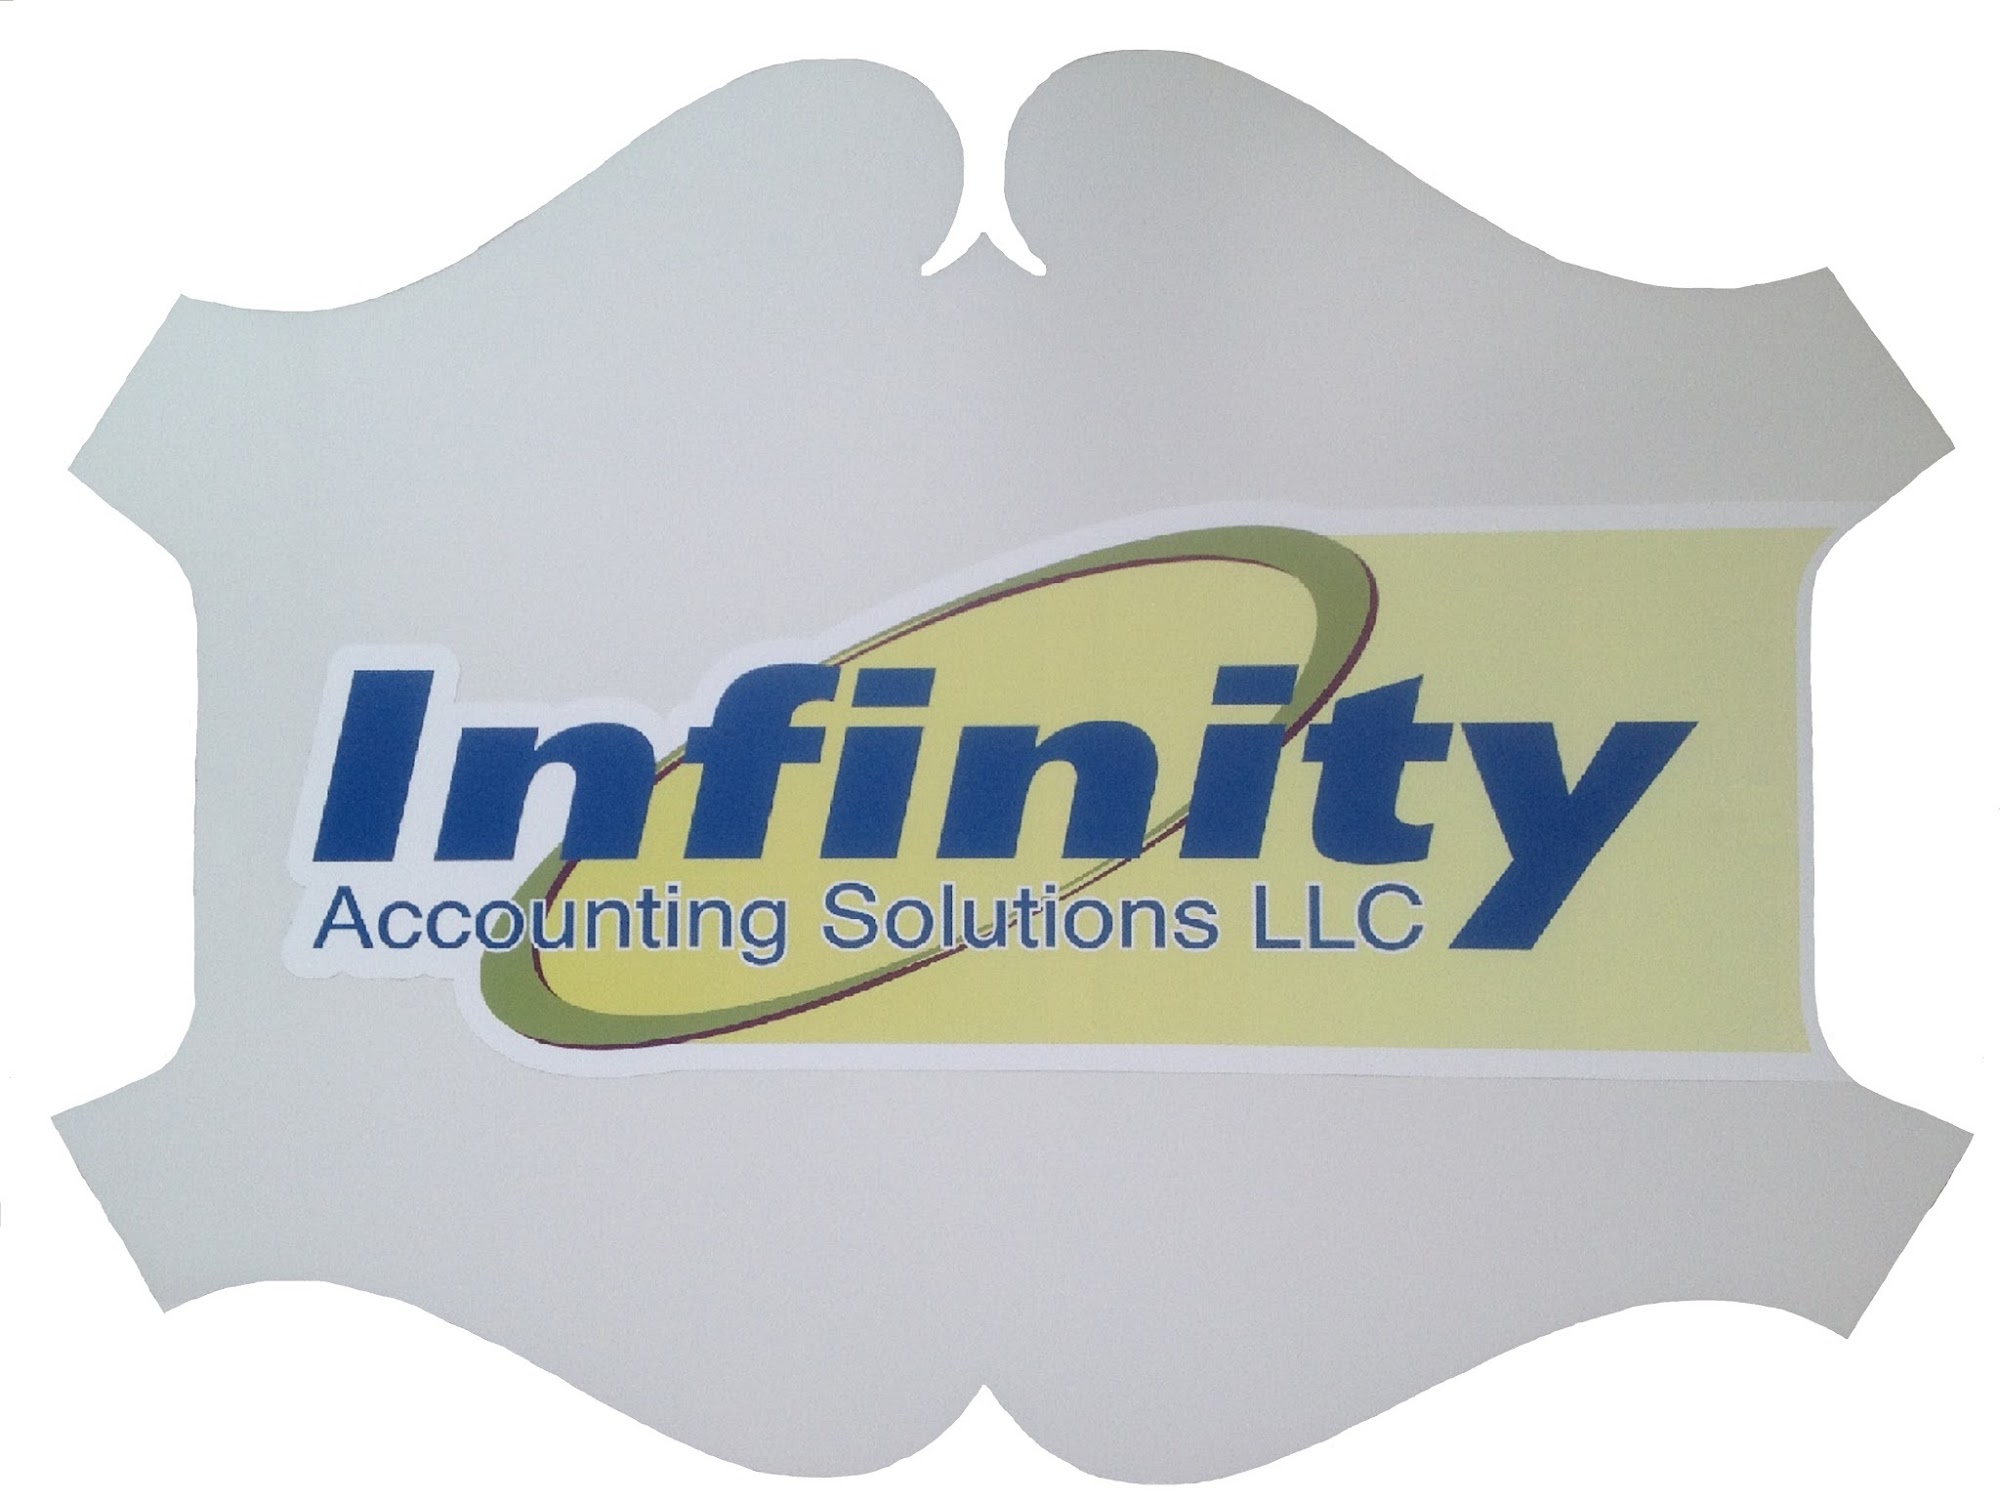 Infinity Accounting Solutions LLC